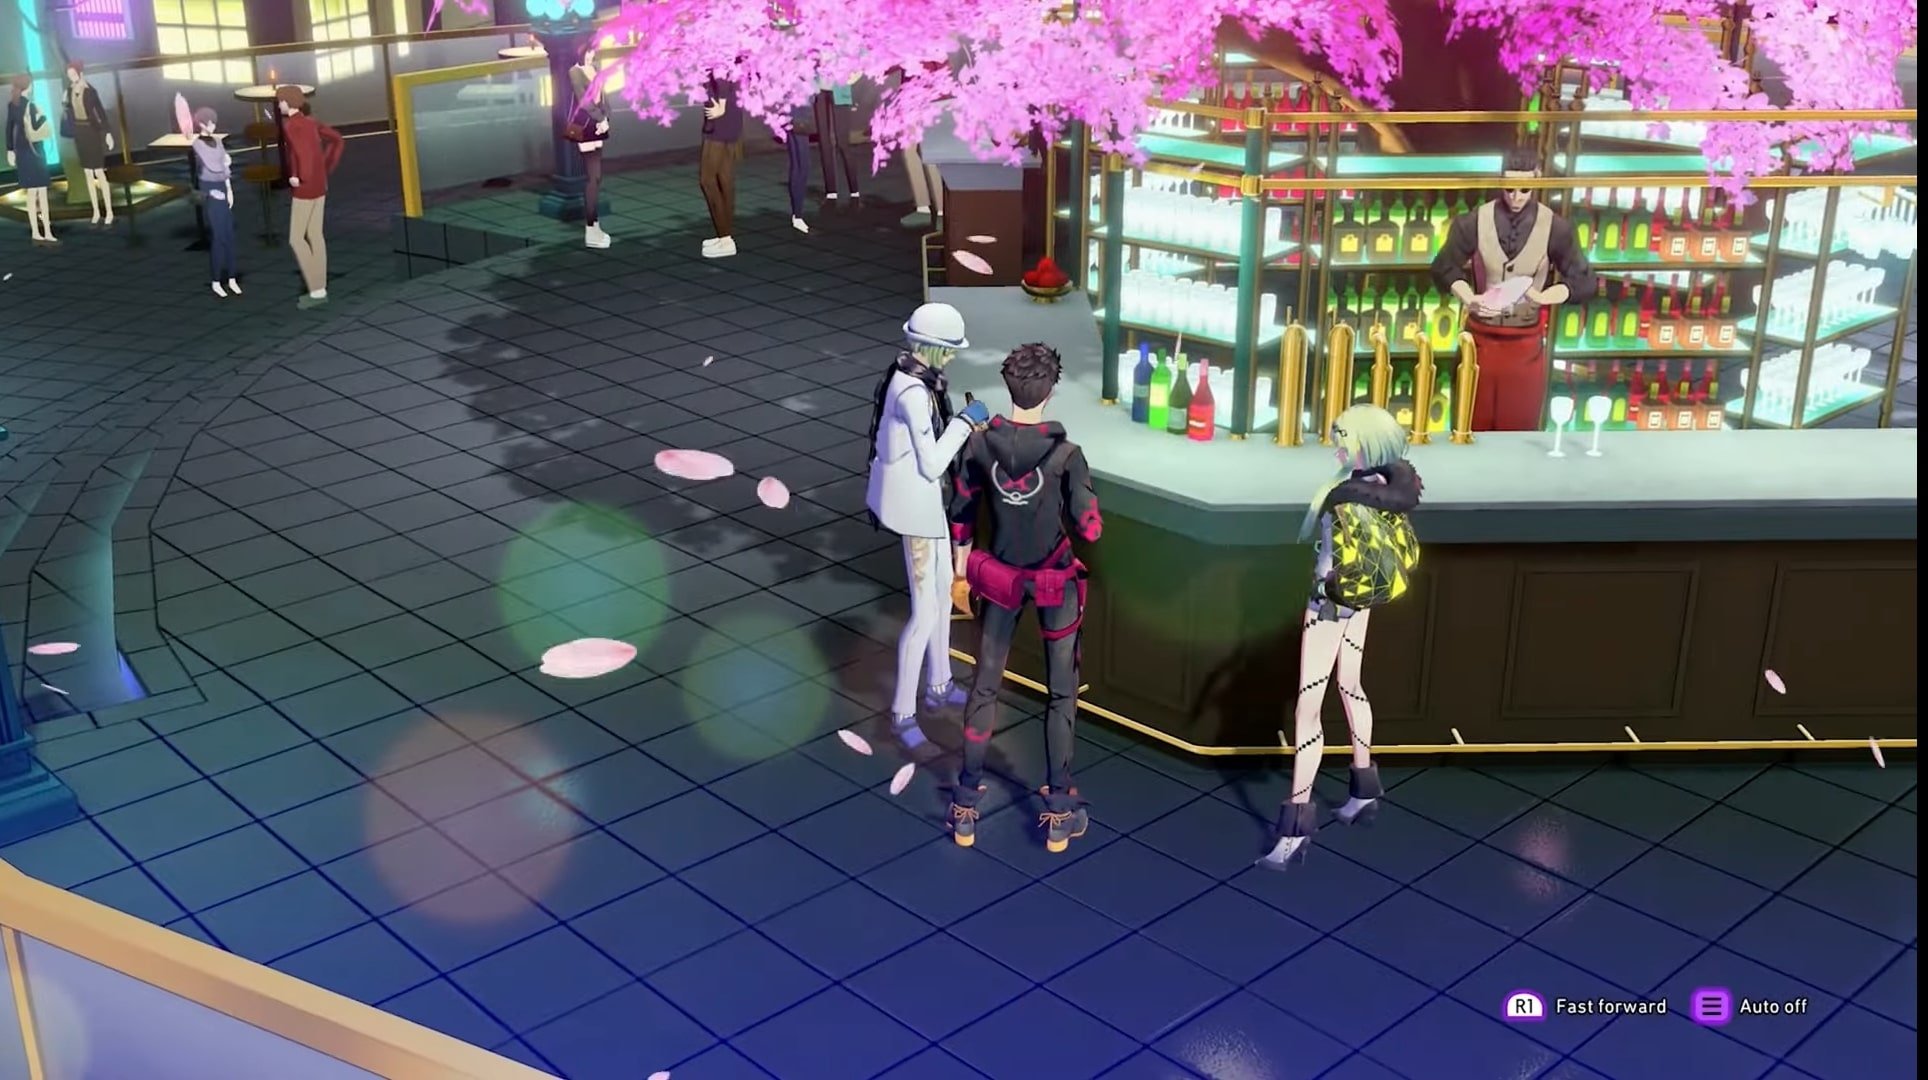 attending the hangout events to level up in Soul Hackers 2